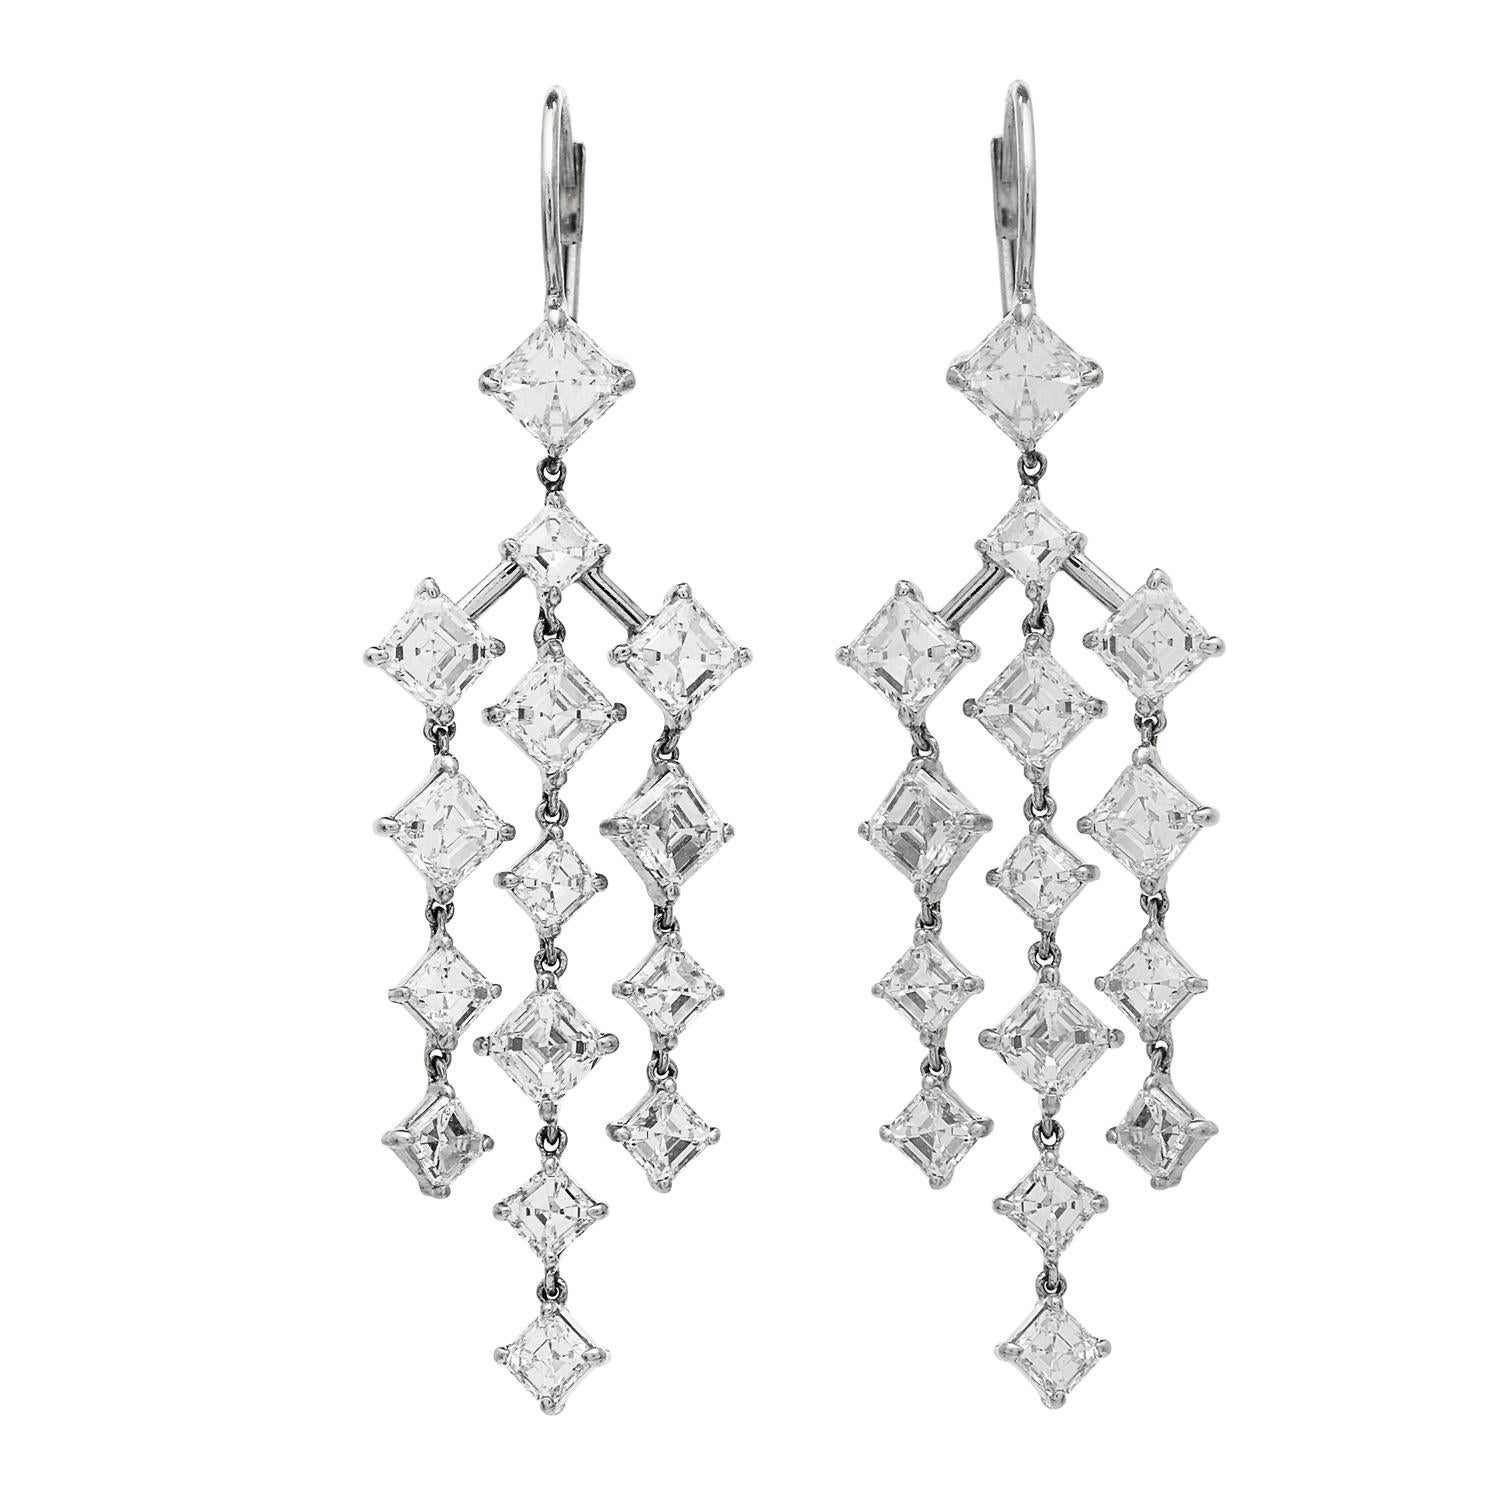 Sparkle Free Movement Drop Chandelier Earrings,

  These fancy earrings are crafted in 18 Karat White Gold. 

They hold approximately 30 genuine Asscher Cut Diamonds, prong set, of 6.85  carats, F-G color, and VS clarity. 

There are Lever Backs